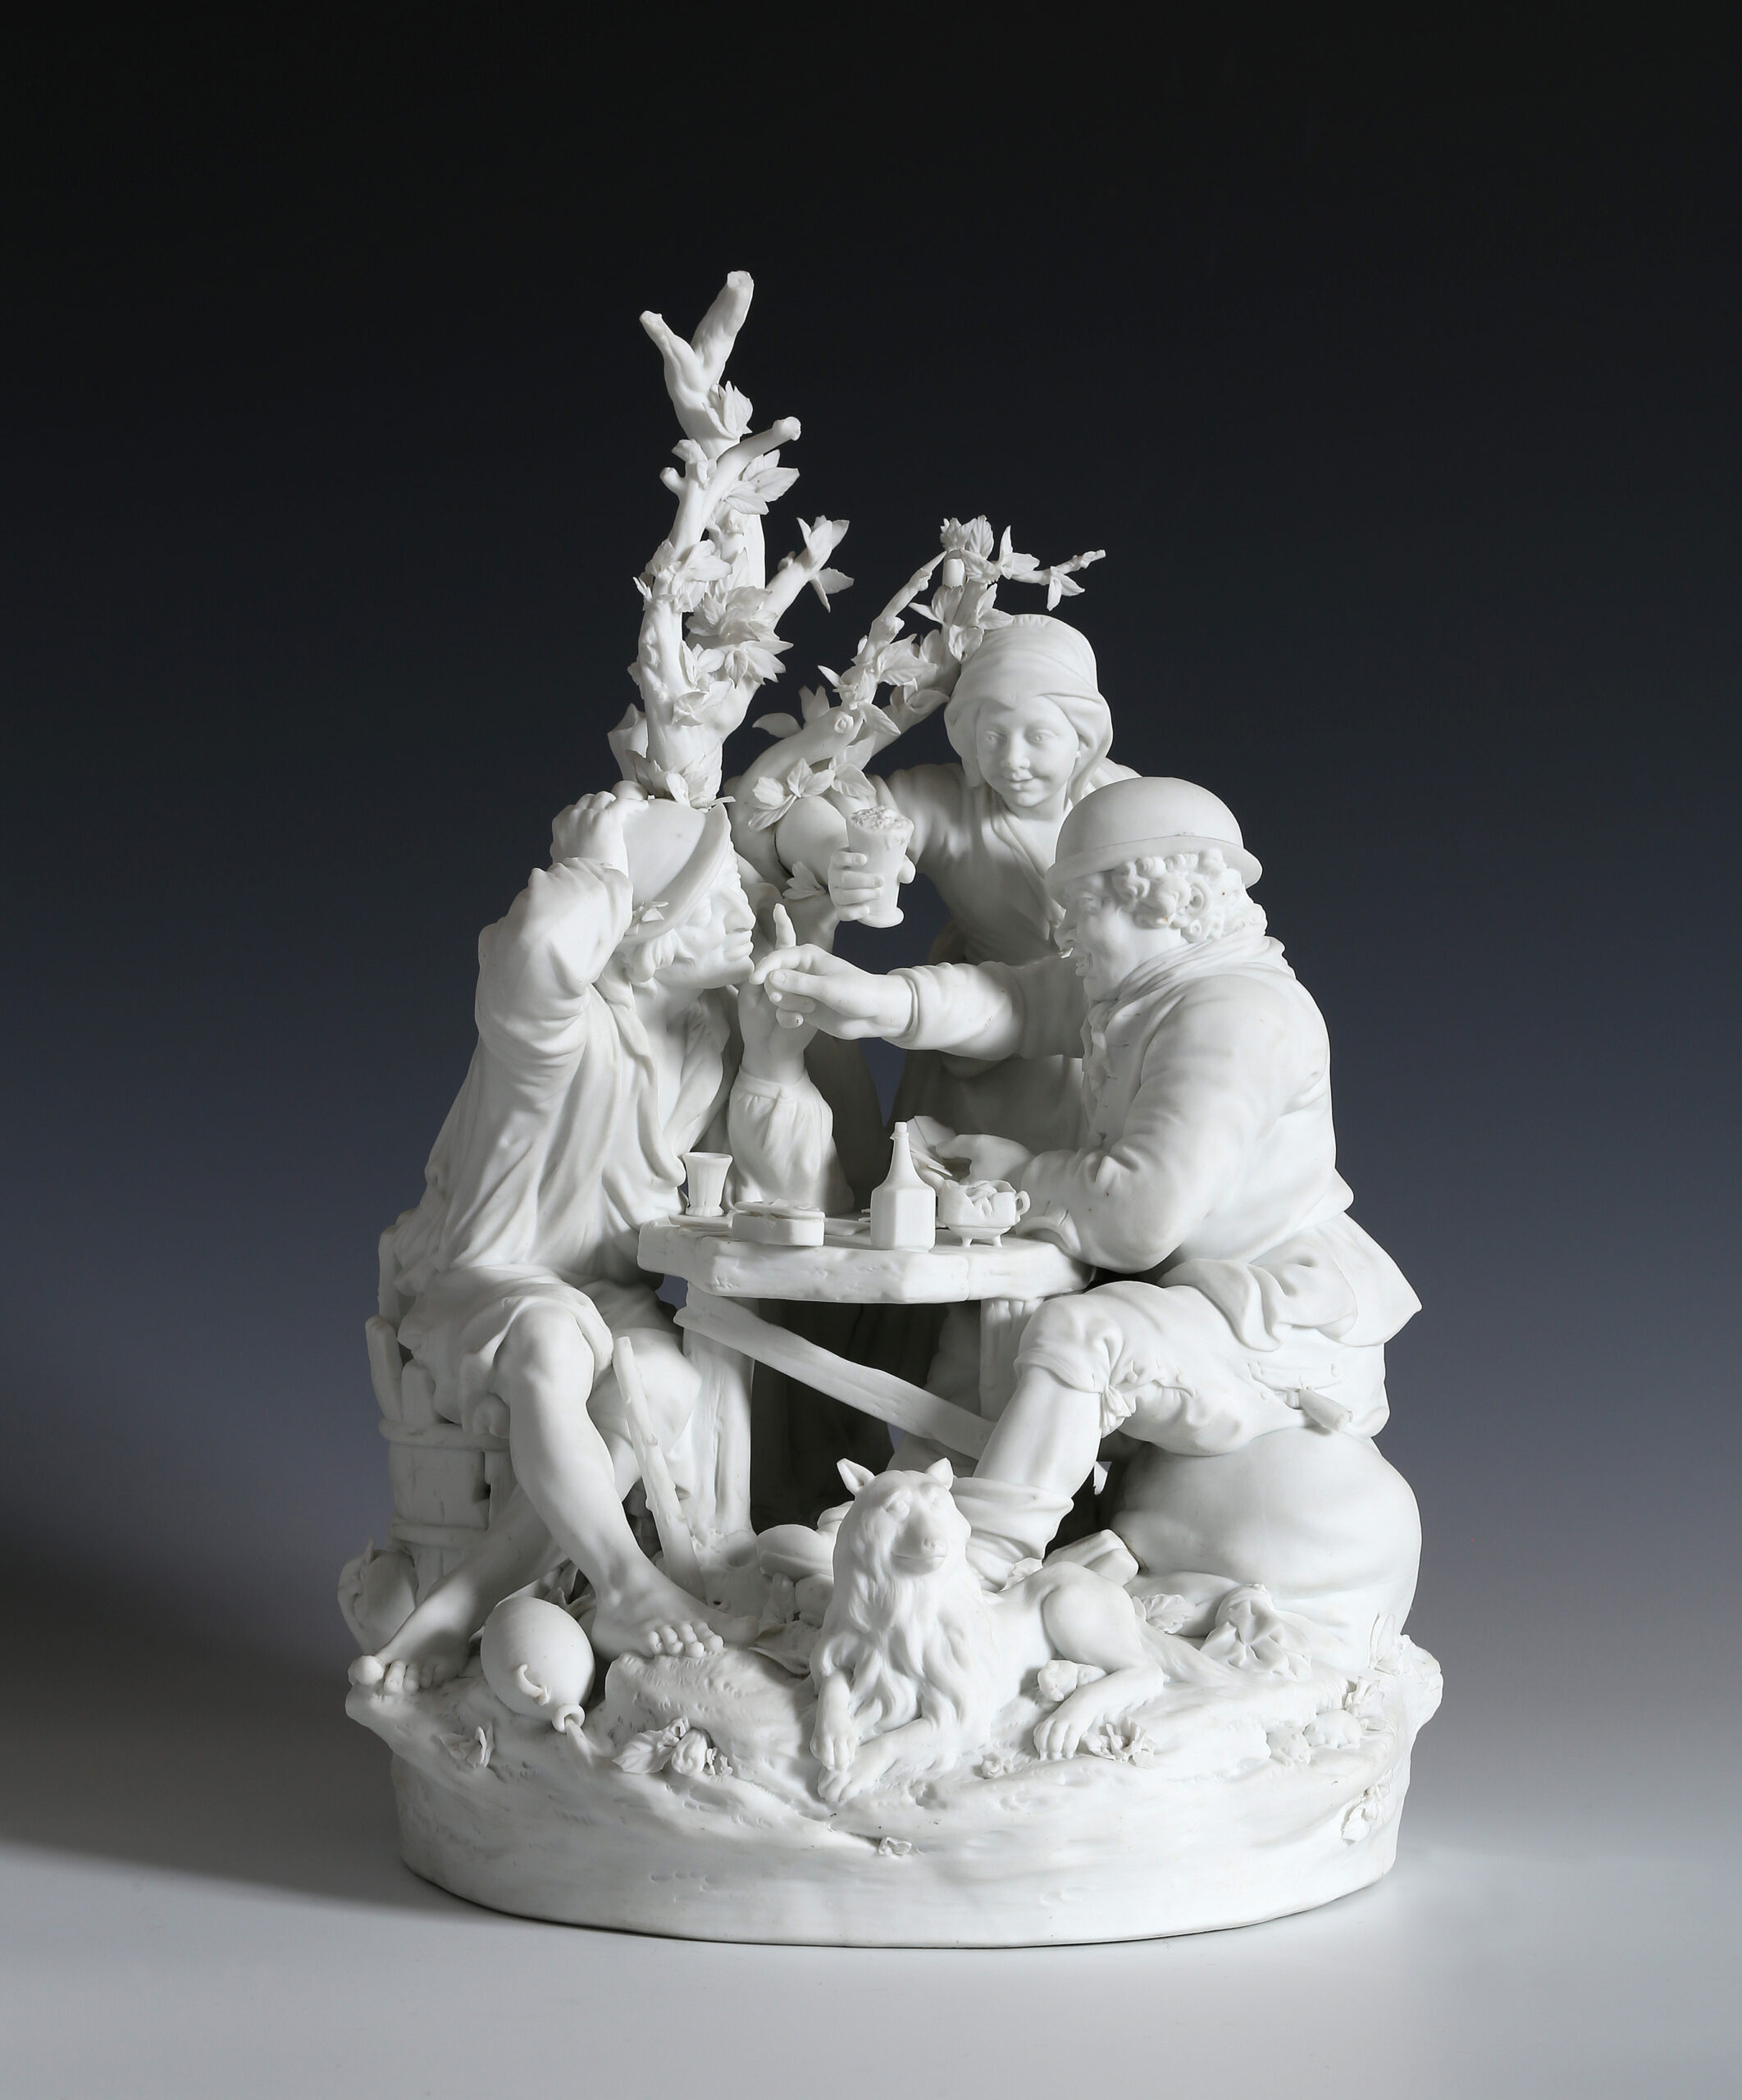 A BISCUIT PORCELAIN GROUP OF CARD PLAYERS  OUDE LOOSDRECHT